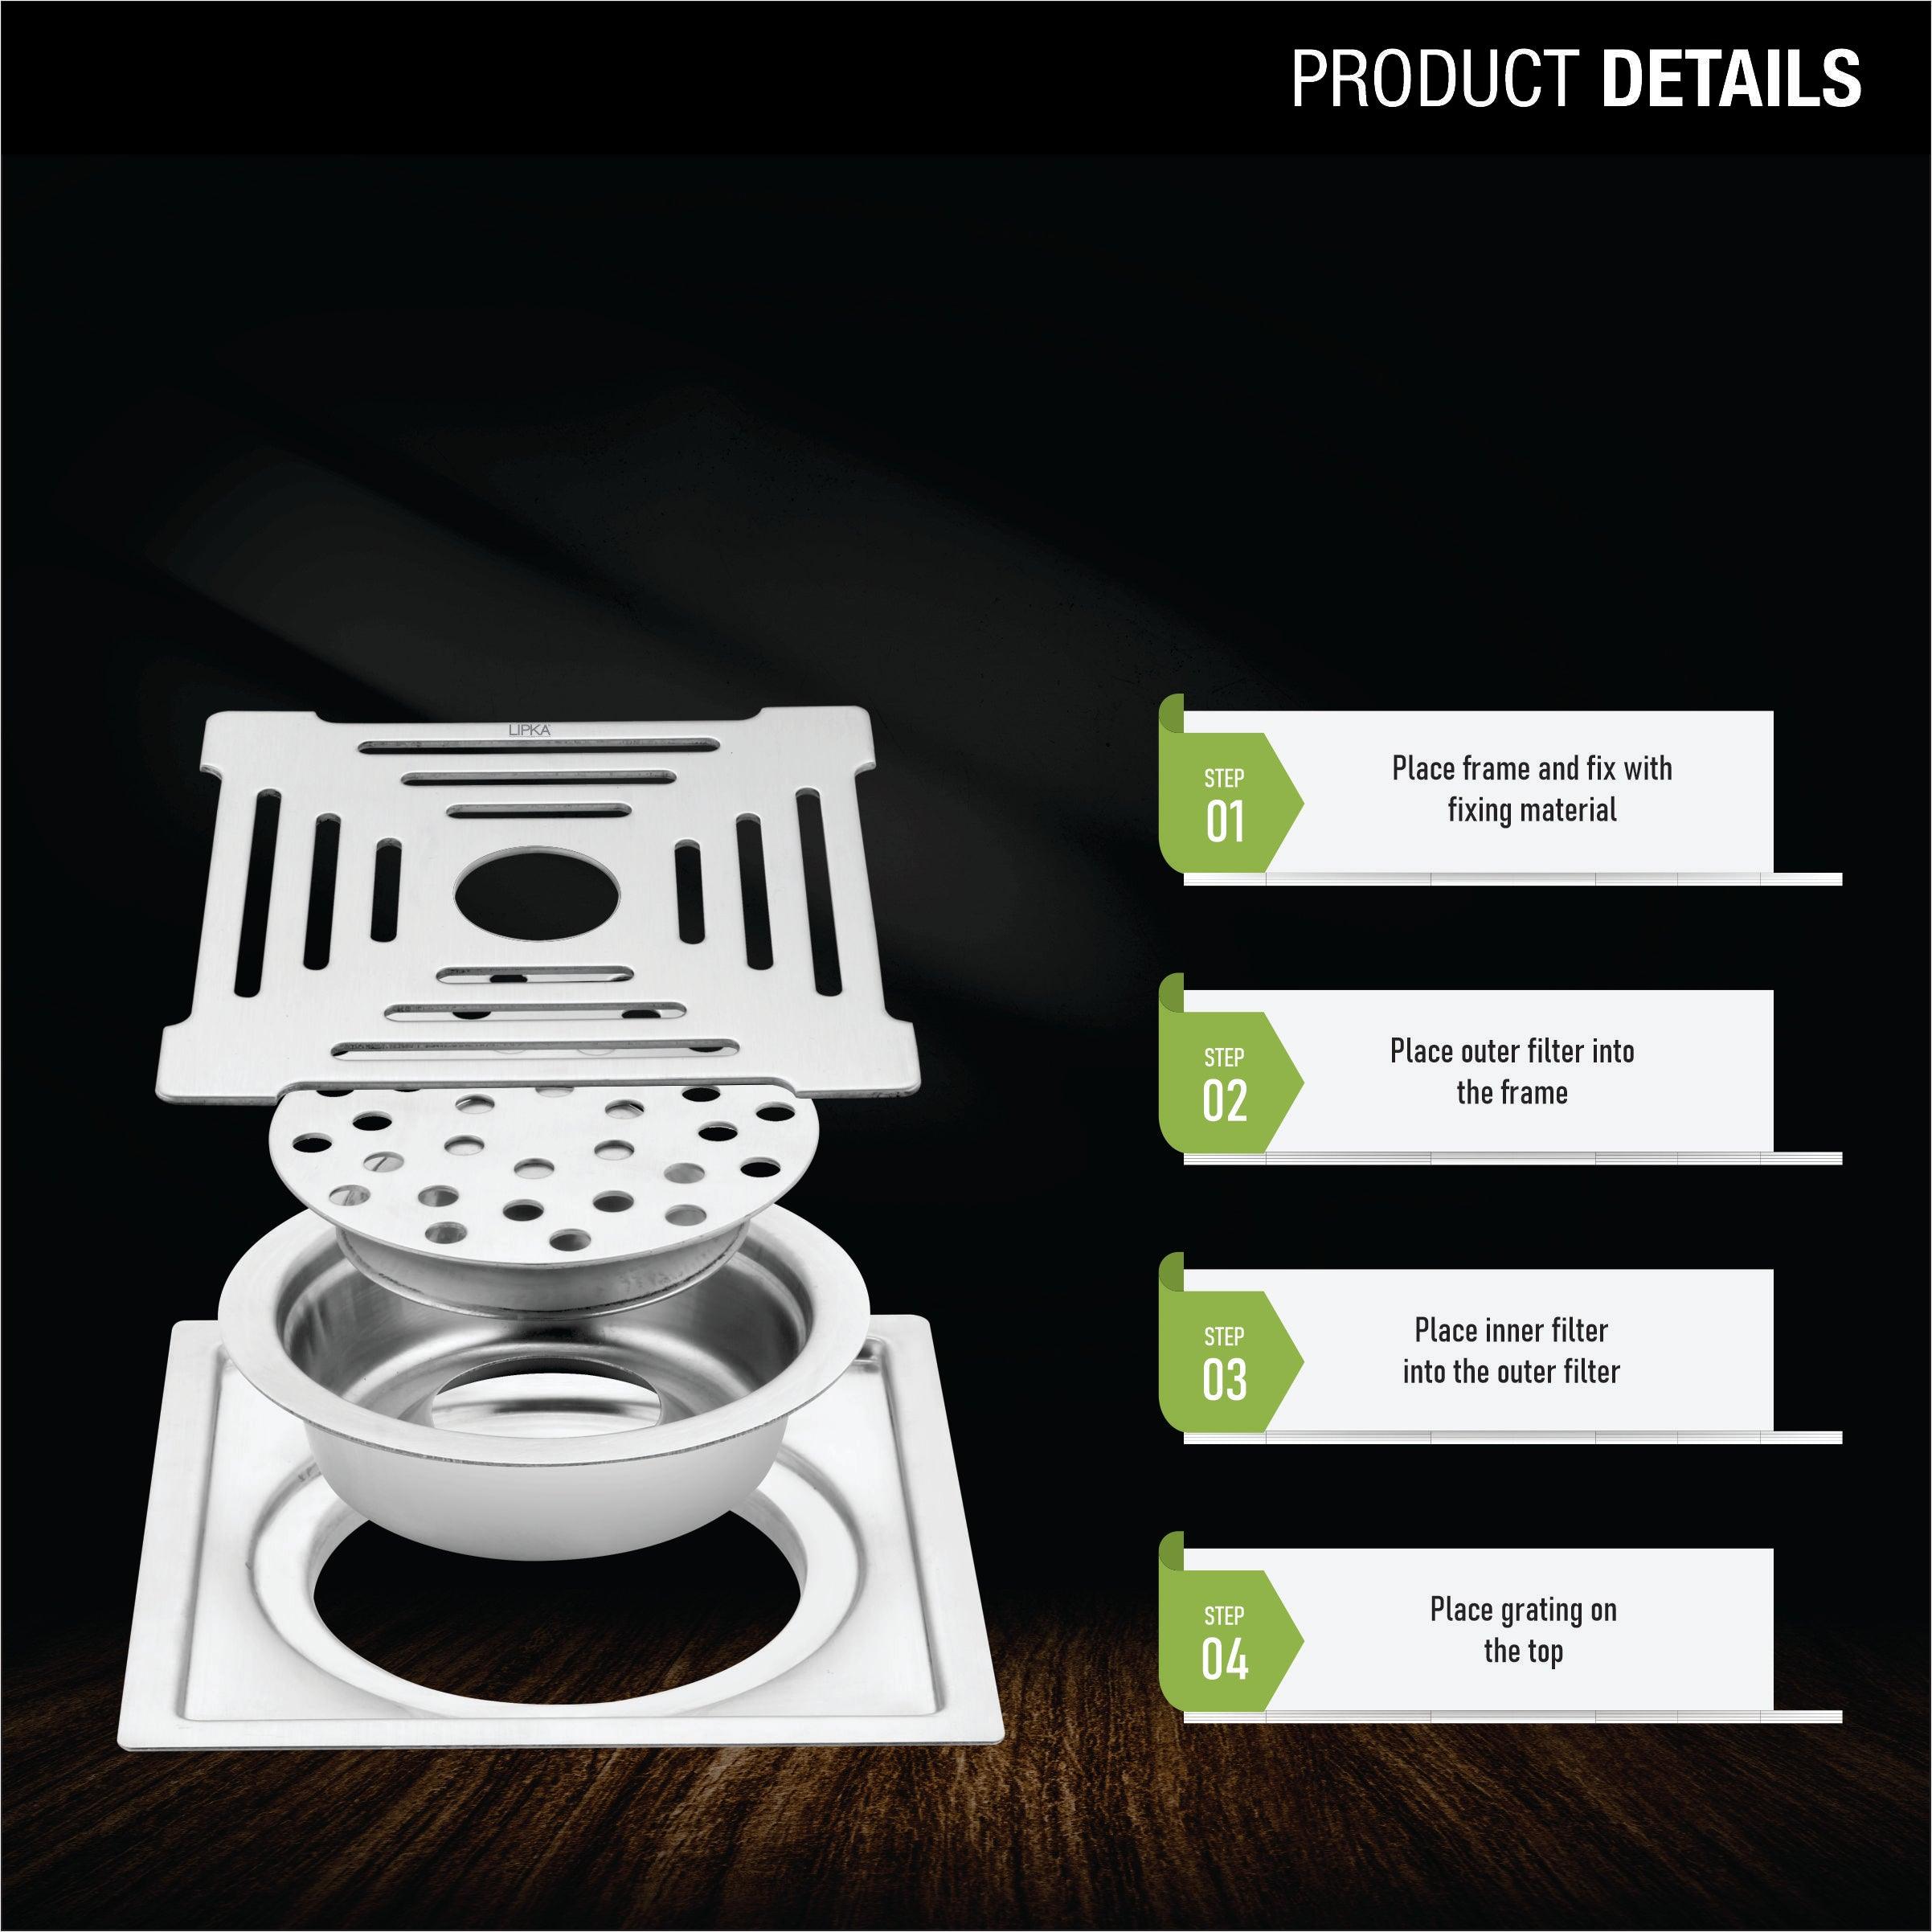 Green Exclusive Square Flat Cut Floor Drain (6 x 6 Inches) with Hole and Cockroach Trap product details